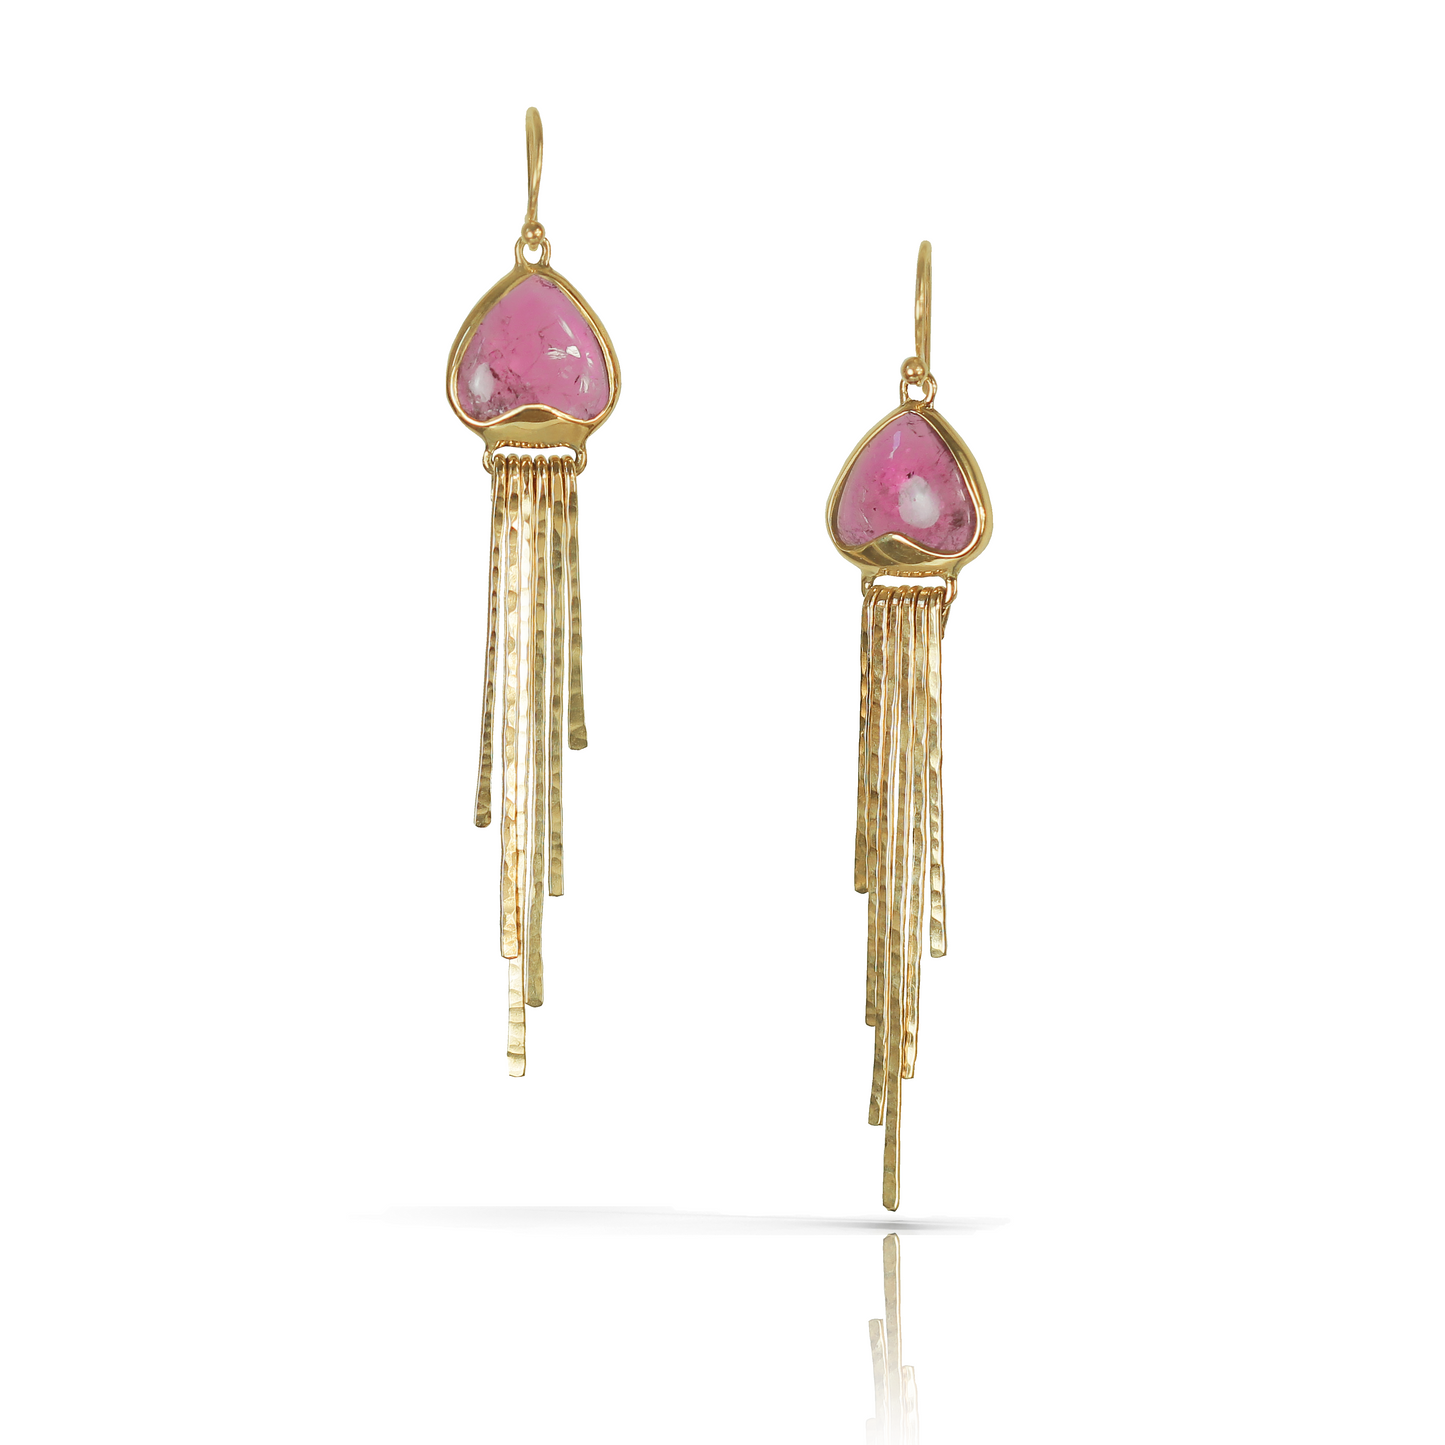 Dangle earrings in Pink Tourmaline and 18k Yellow Gold. Bezel set, triangle-shaped stone, narrow hammered gold dangling elements, and french hooks. 